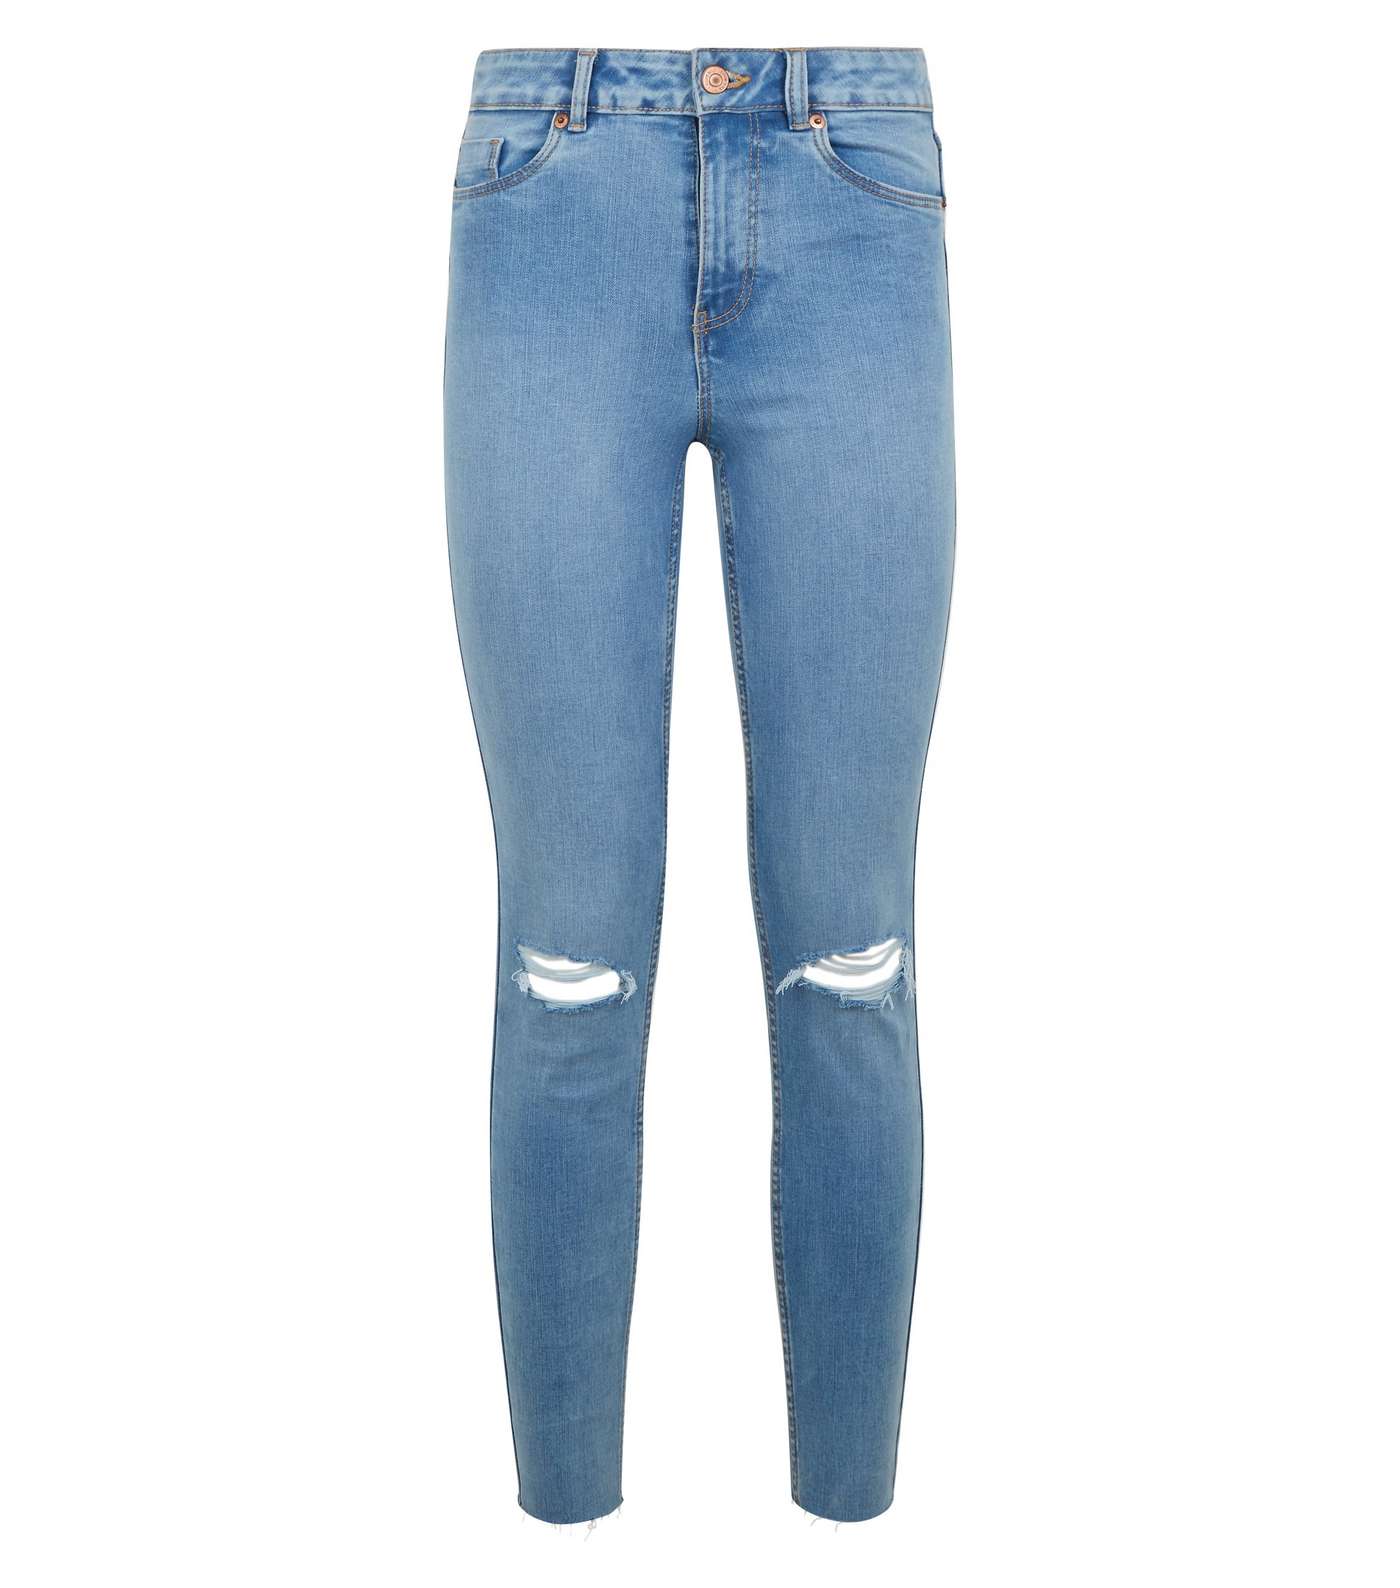 Pale Blue 'Lift & Shape' Ripped Skinny Jeans Image 4